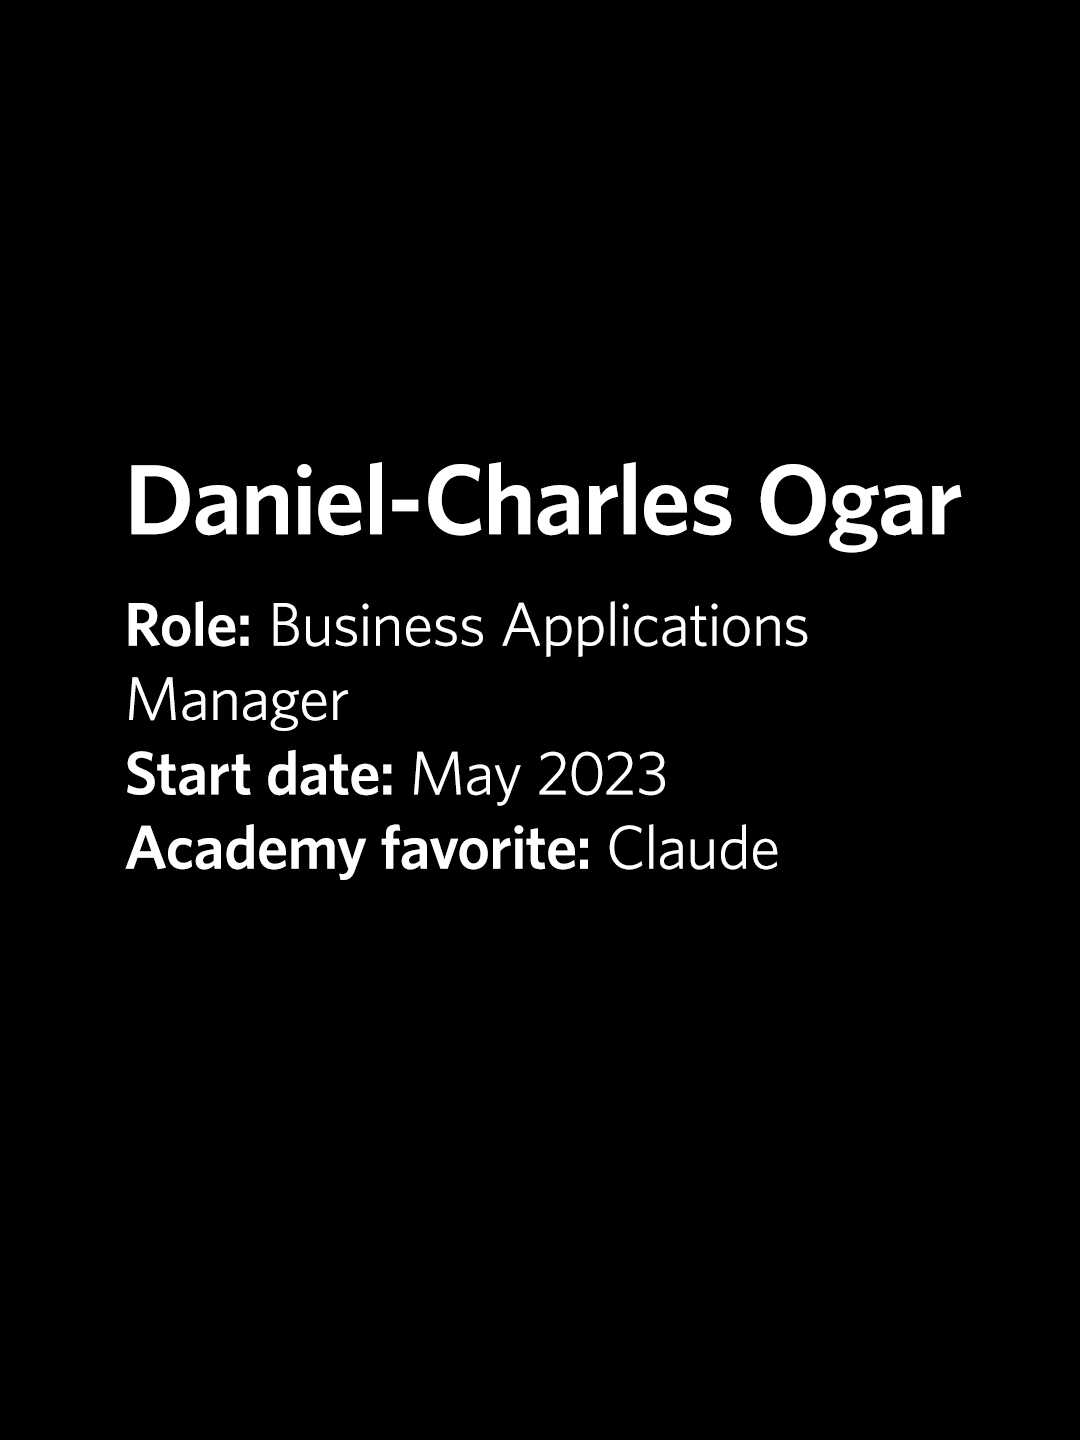 Daniel-Charles Ogar, Business Applications Manager at the Academy, started May 2023, favorite exhibit is Claude